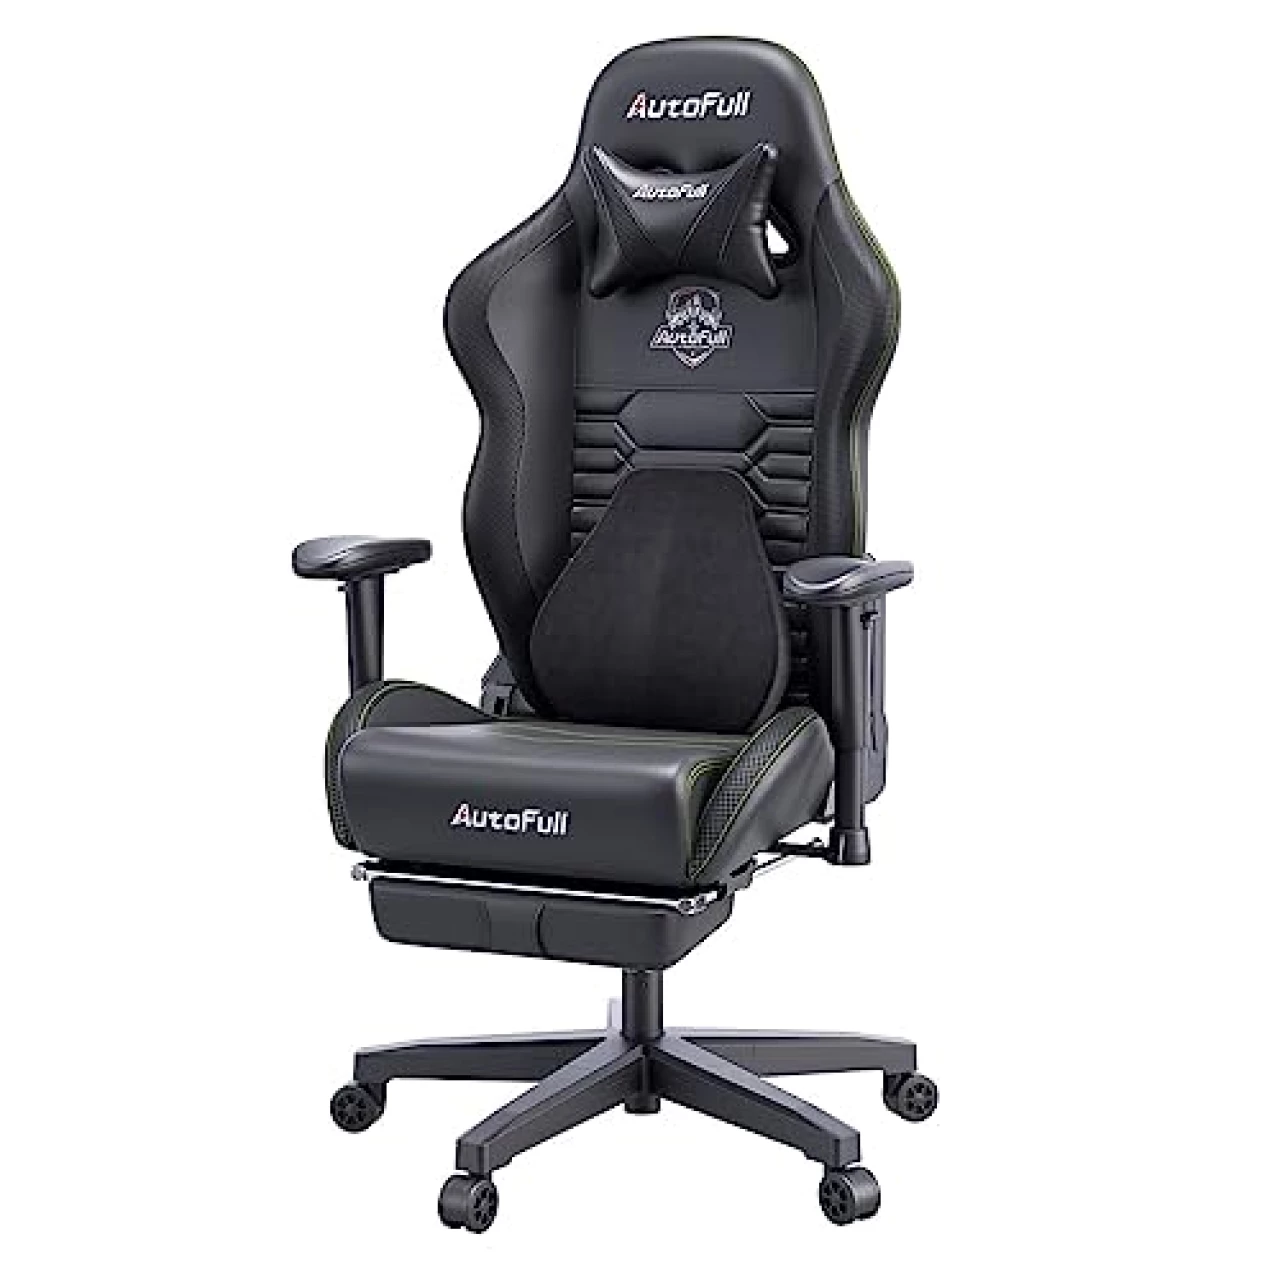 AutoFull C3 Gaming Chair Office Chair PC Chair with Ergonomics Lumbar Support, Racing Style PU Leather High Back Adjustable Swivel Task Chair with Footrest (Black)